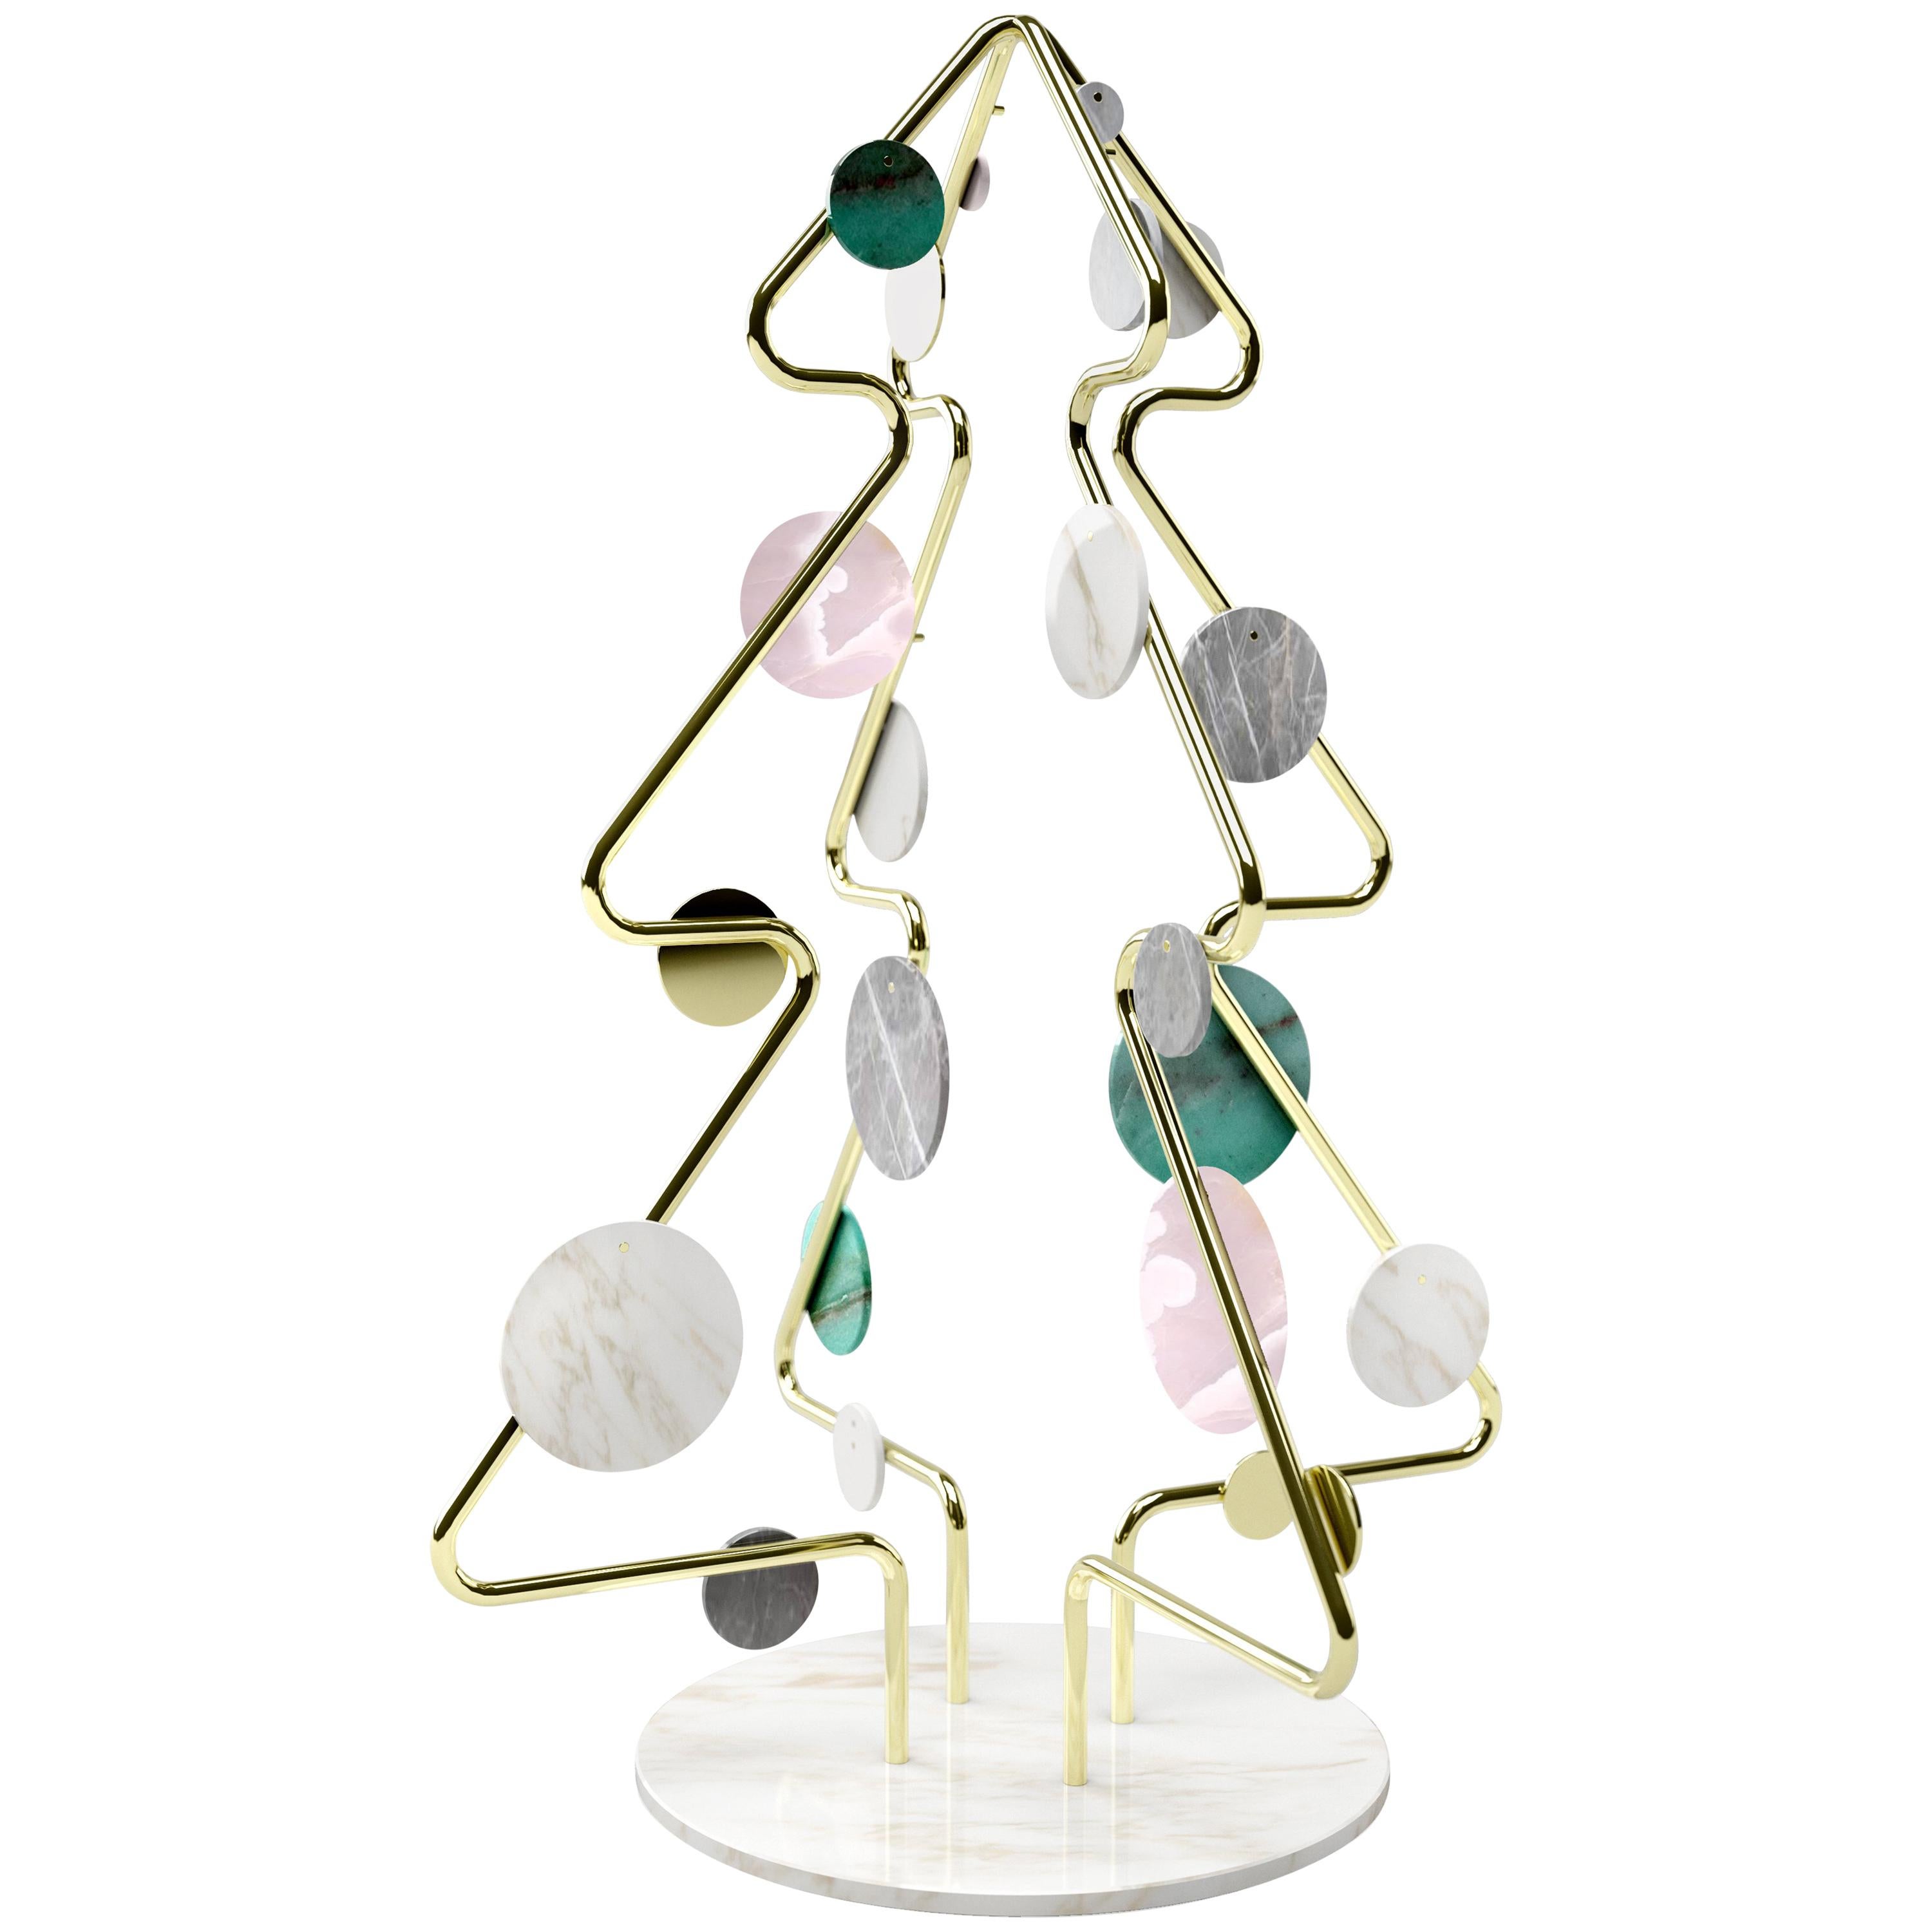 Christmas Tree Decorative Sculpture Marble Onyx Brass Collectible Design Italy